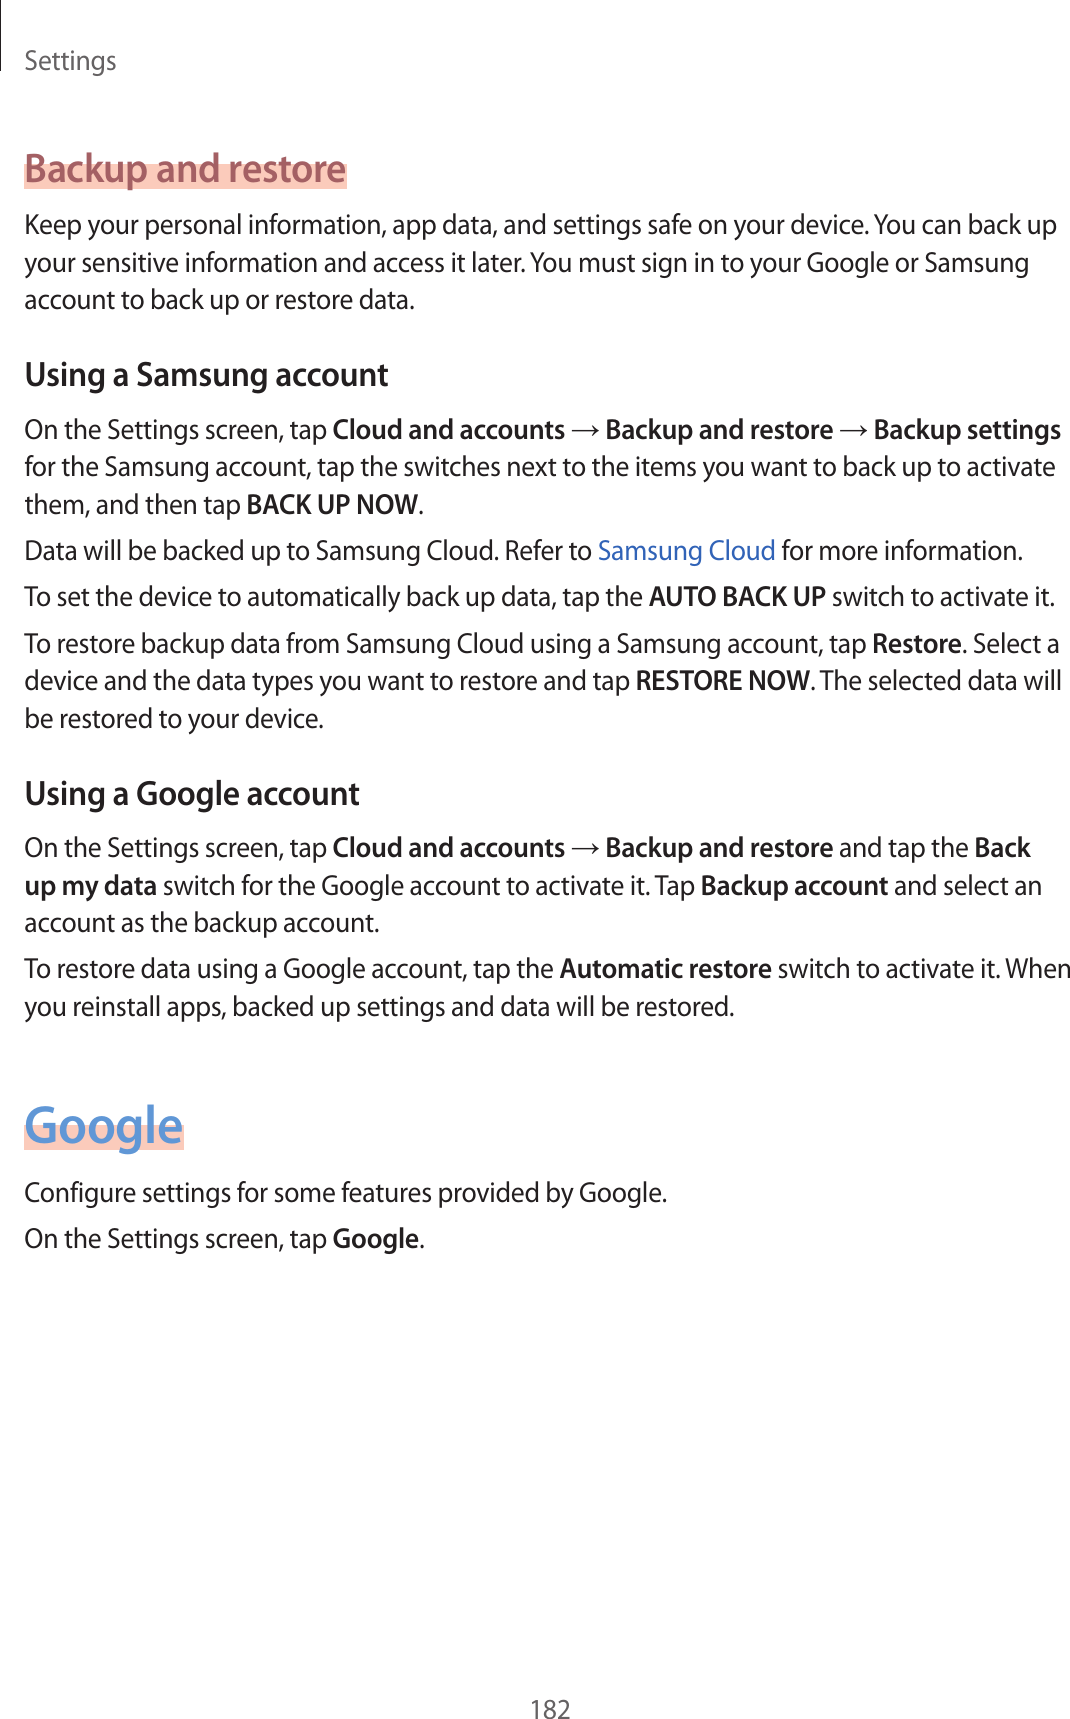 Settings182Backup and restoreKeep your personal information, app data, and settings safe on your device. You can back up your sensitive information and access it later. You must sign in to your Google or Samsung account to back up or restore data.Using a Samsung accountOn the Settings screen, tap Cloud and accounts → Backup and restore → Backup settings for the Samsung account, tap the switches next to the items you want to back up to activate them, and then tap BACK UP NOW.Data will be backed up to Samsung Cloud. Refer to Samsung Cloud for more information.To set the device to automatically back up data, tap the AUTO BACK UP switch to activate it.To restore backup data from Samsung Cloud using a Samsung account, tap Restore. Select a device and the data types you want to restore and tap RESTORE NOW. The selected data will be restored to your device.Using a Google accountOn the Settings screen, tap Cloud and accounts → Backup and restore and tap the Back up my data switch for the Google account to activate it. Tap Backup account and select an account as the backup account.To restore data using a Google account, tap the Automatic restore switch to activate it. When you reinstall apps, backed up settings and data will be restored.GoogleConfigure settings for some features provided by Google.On the Settings screen, tap Google.